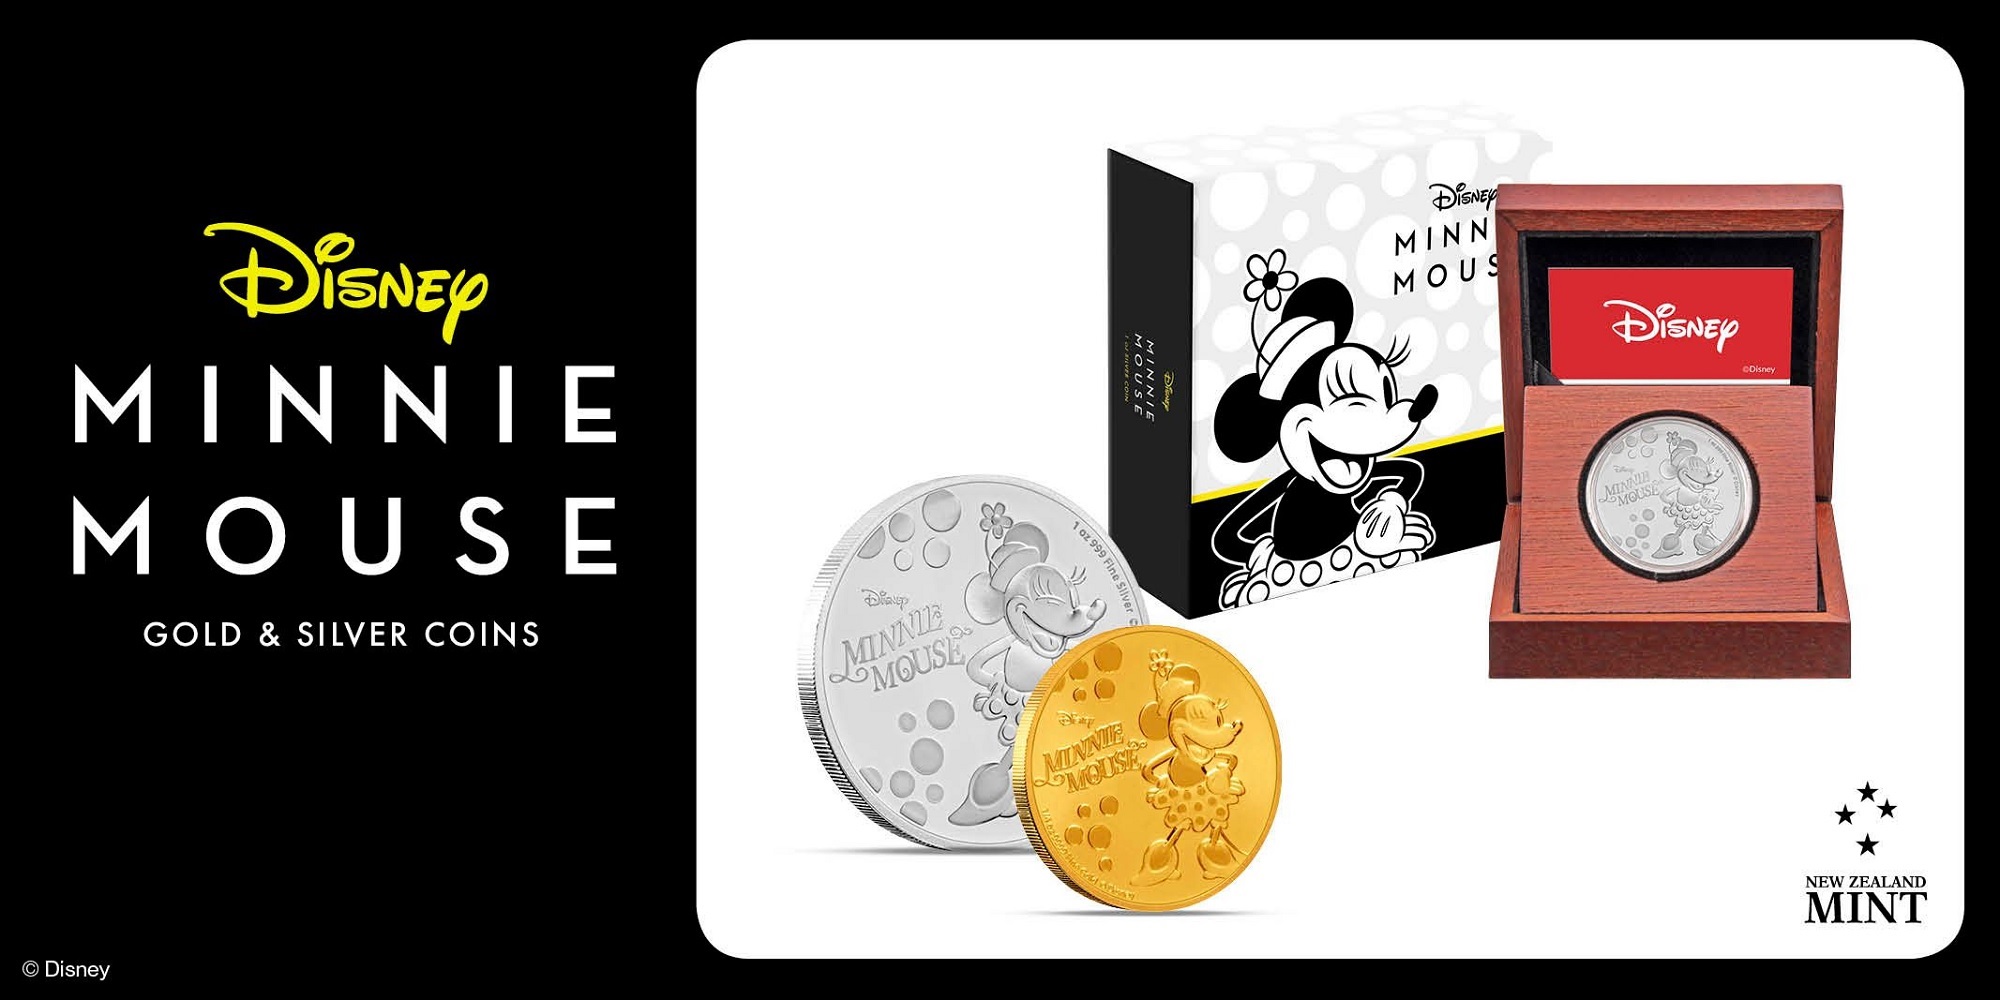 (W160.2.D.2019.30-00854) 2 Dollars Niue 2019 1 oz Proof silver - Minnie Mouse (blog illustration) (zoom)